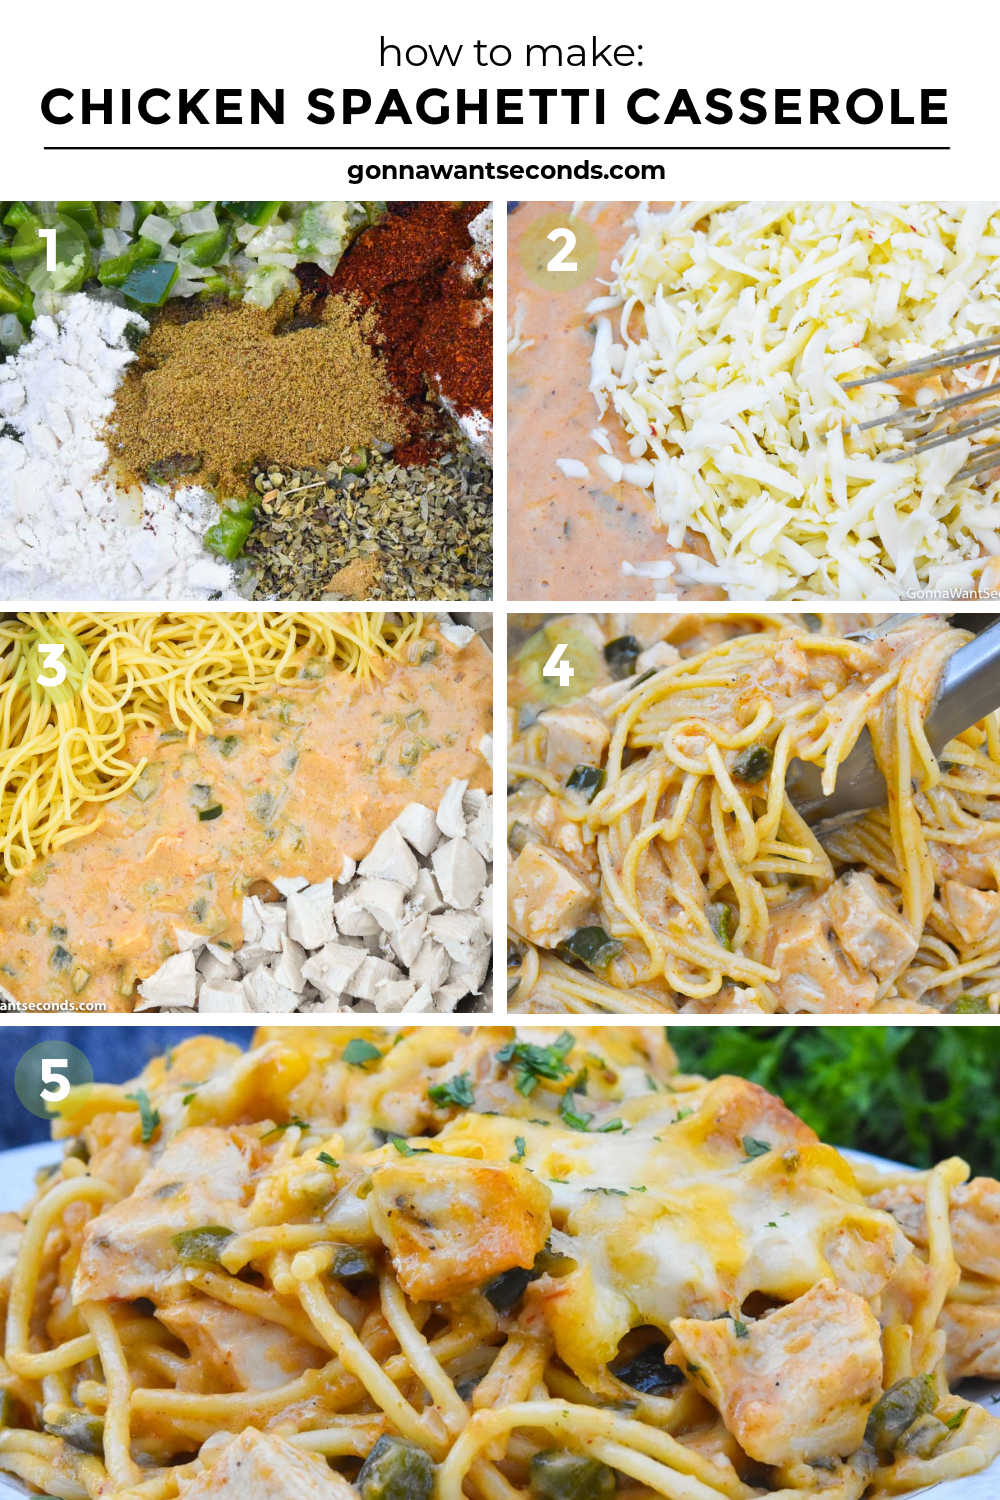 Step by step How to make chicken spaghetti casserole